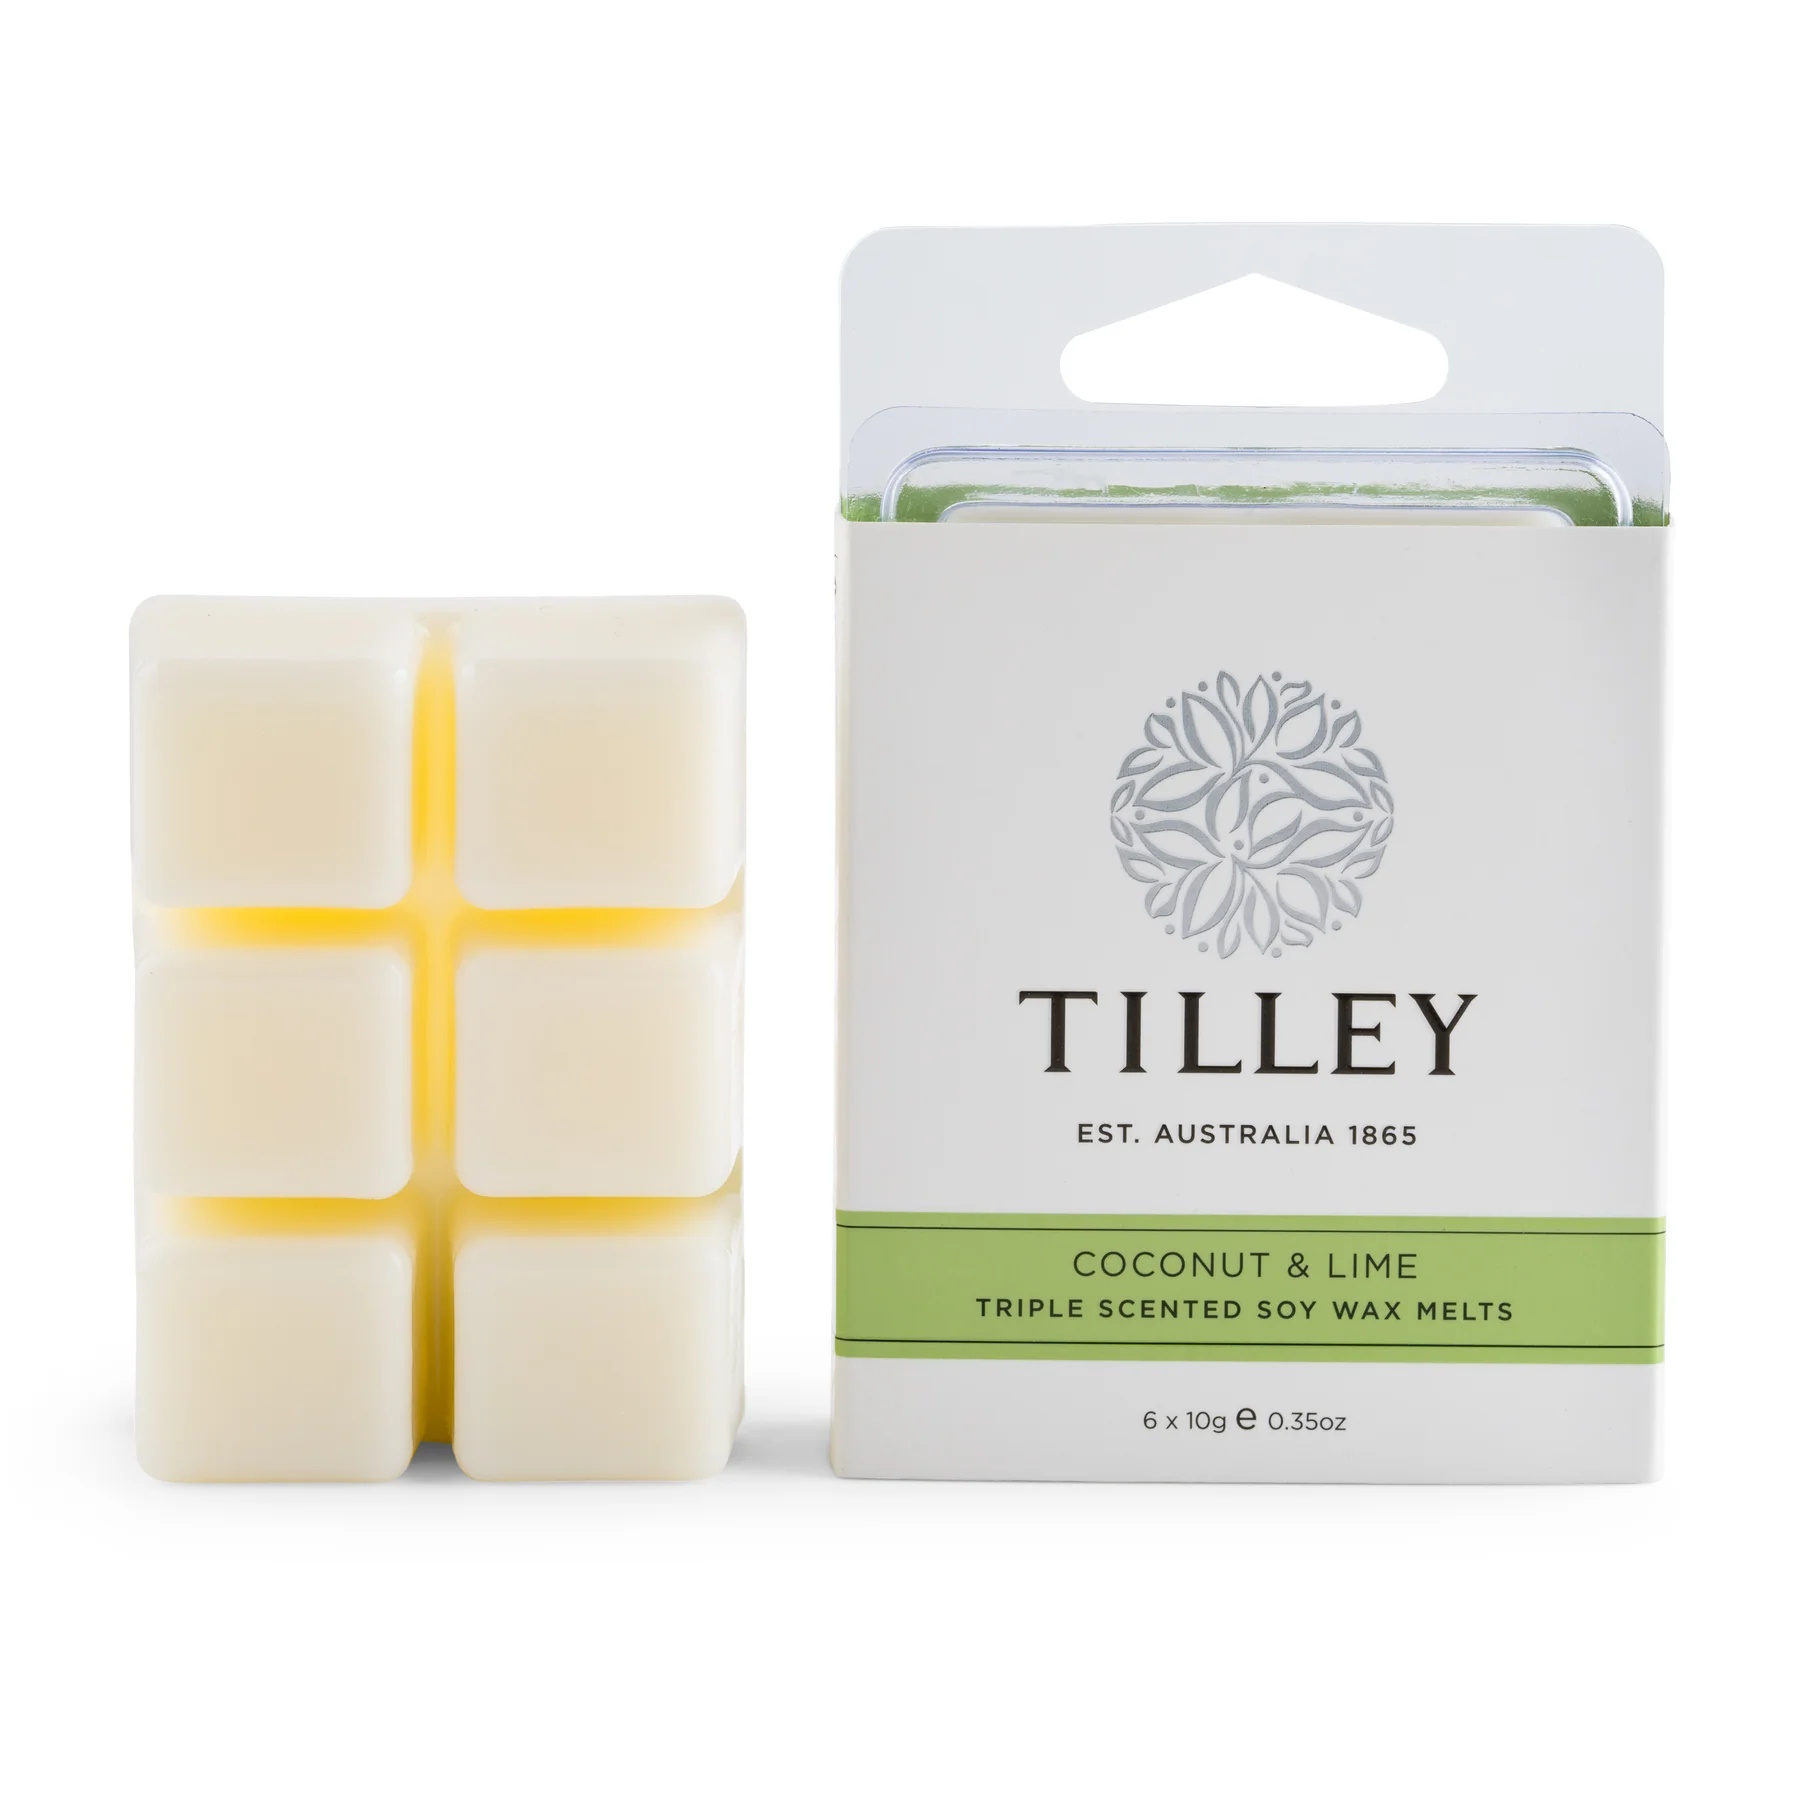 Tilley Coconut & Lime Square Soy Wax Melts 60g